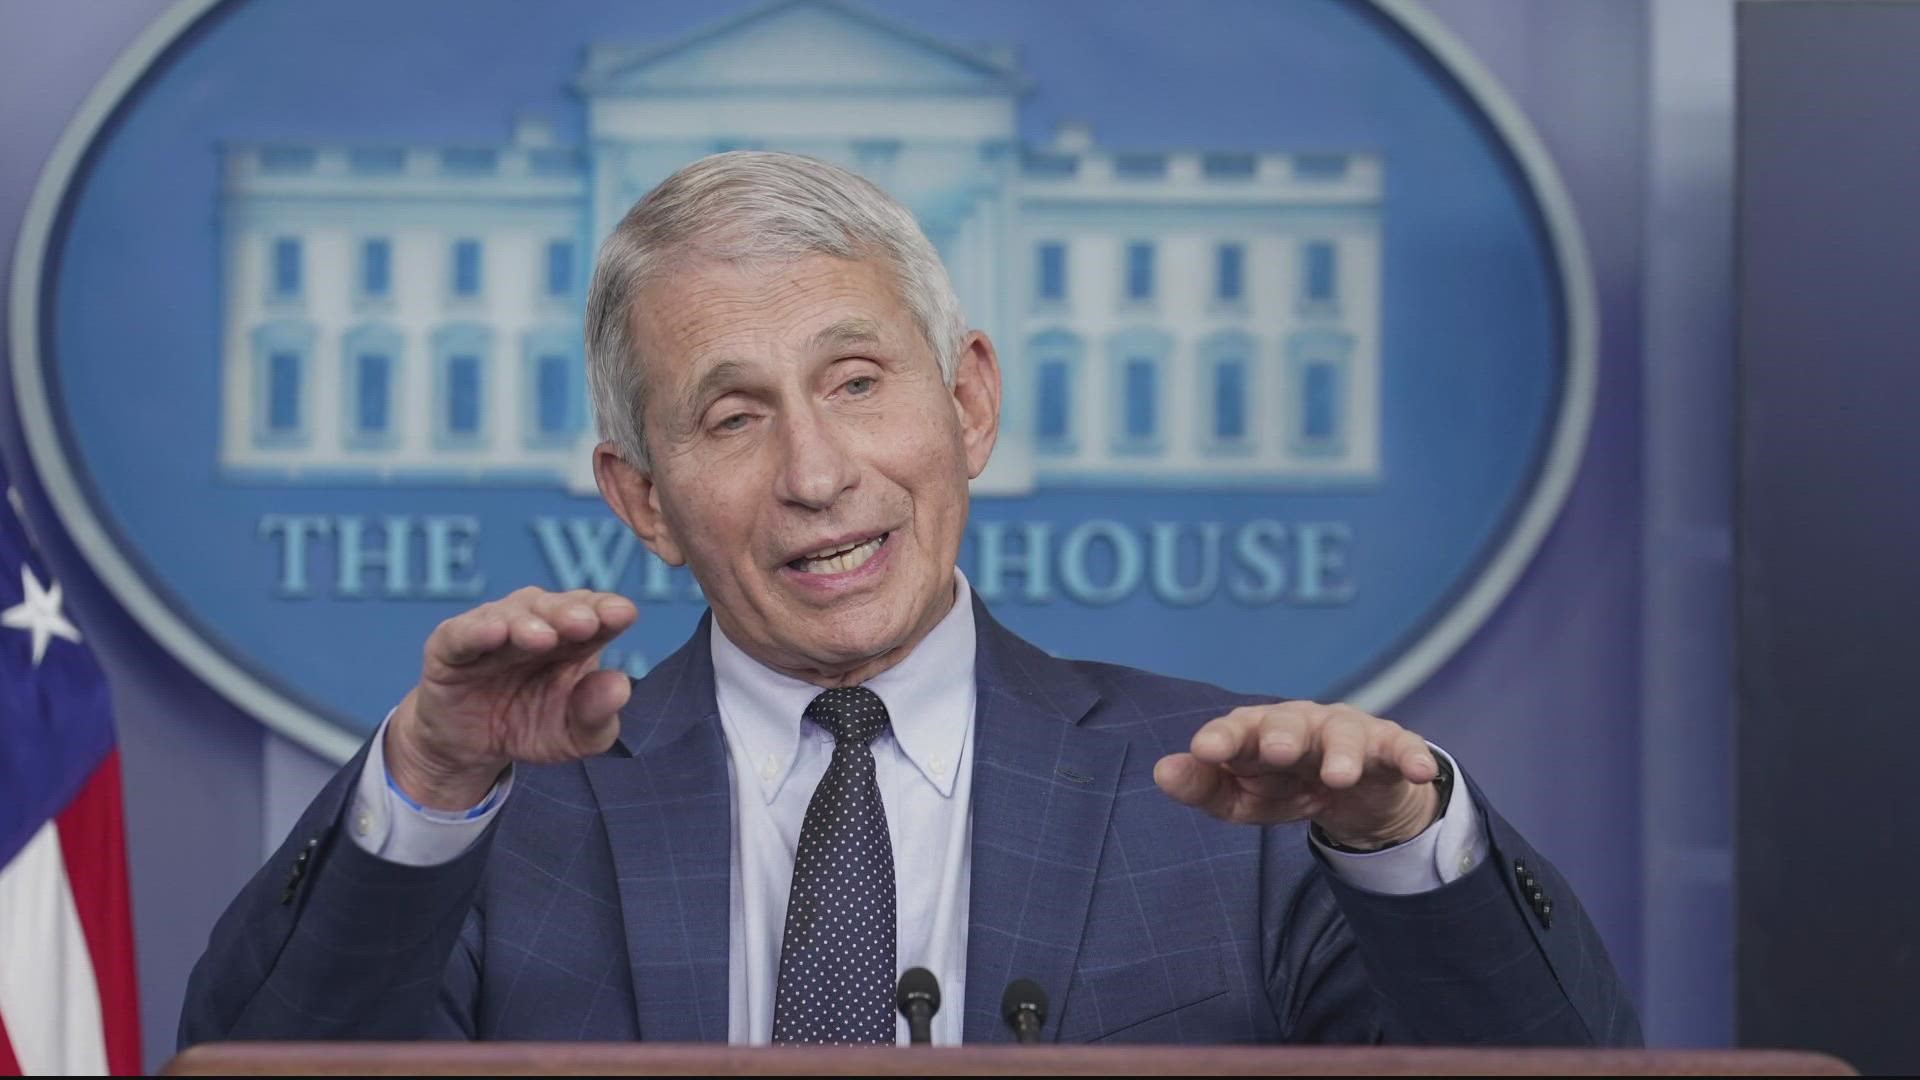 Fauci directs the National Institute of Allergy and Infectious Diseases, is chief medical adviser to President Joe Biden and leads a lab studying the immune system.